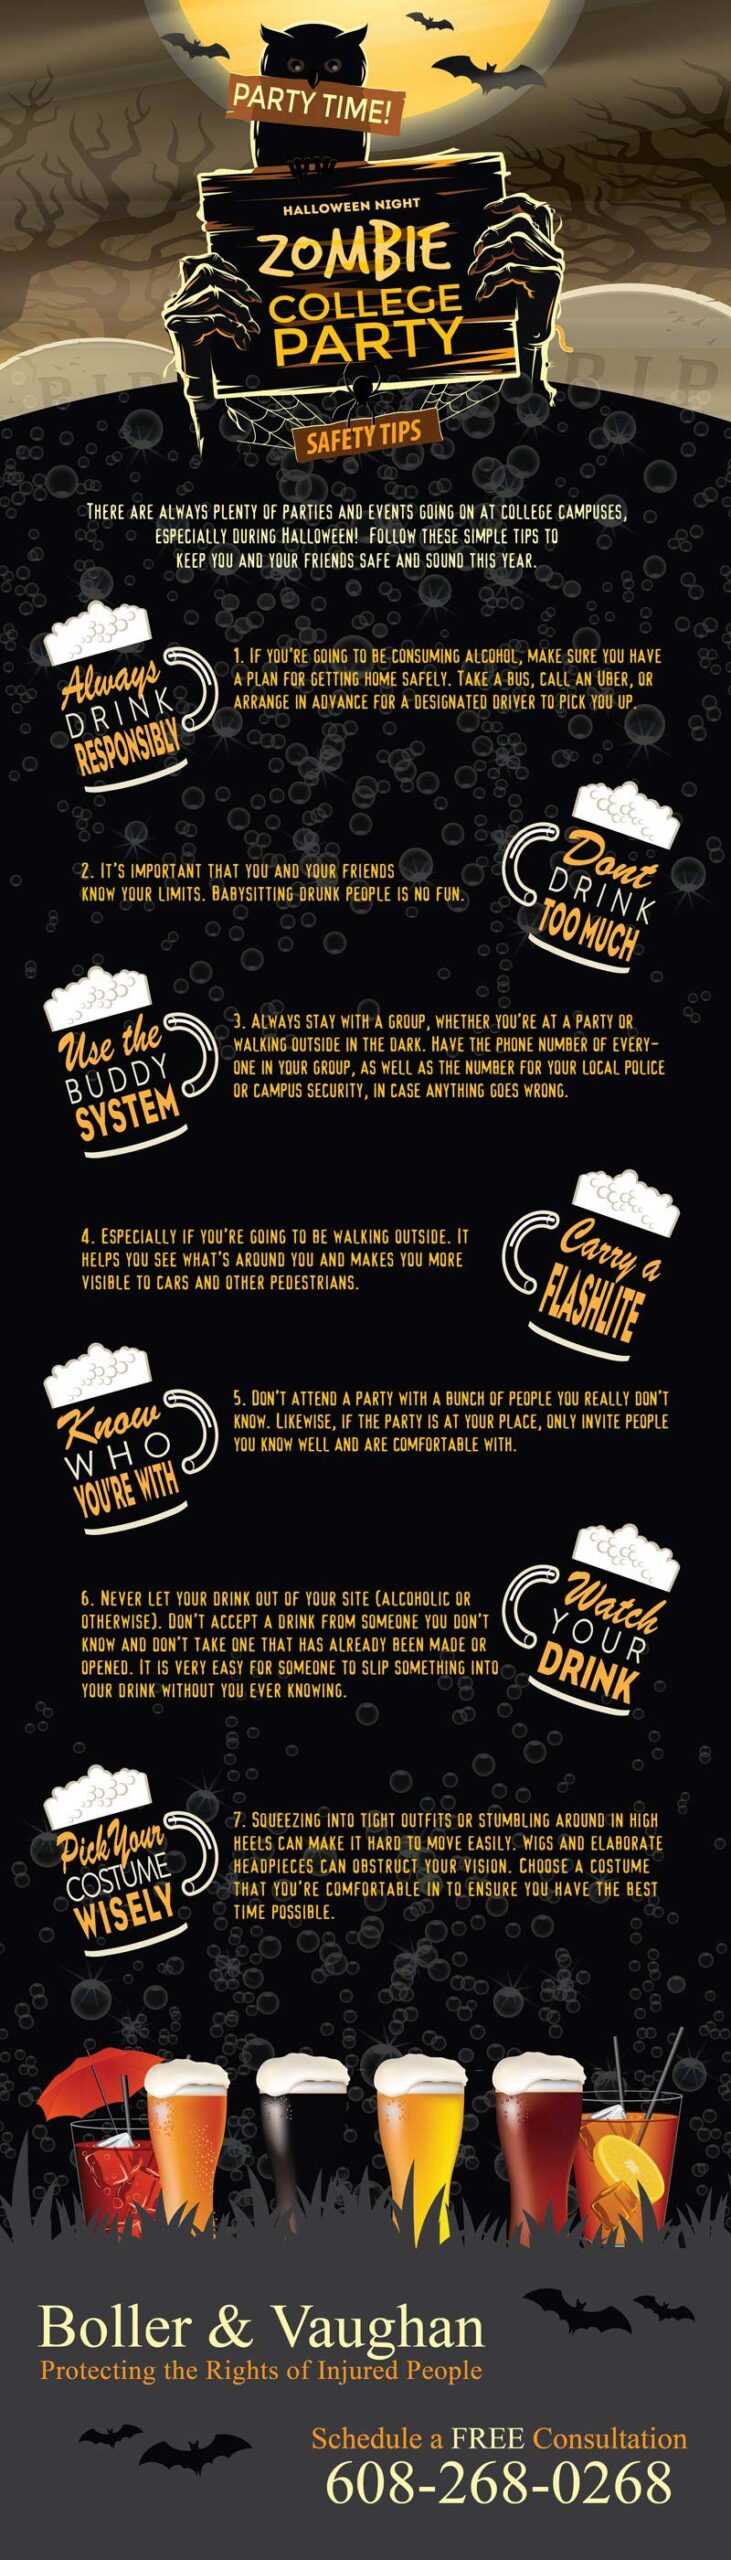 Halloween Safety Tips For College Partying